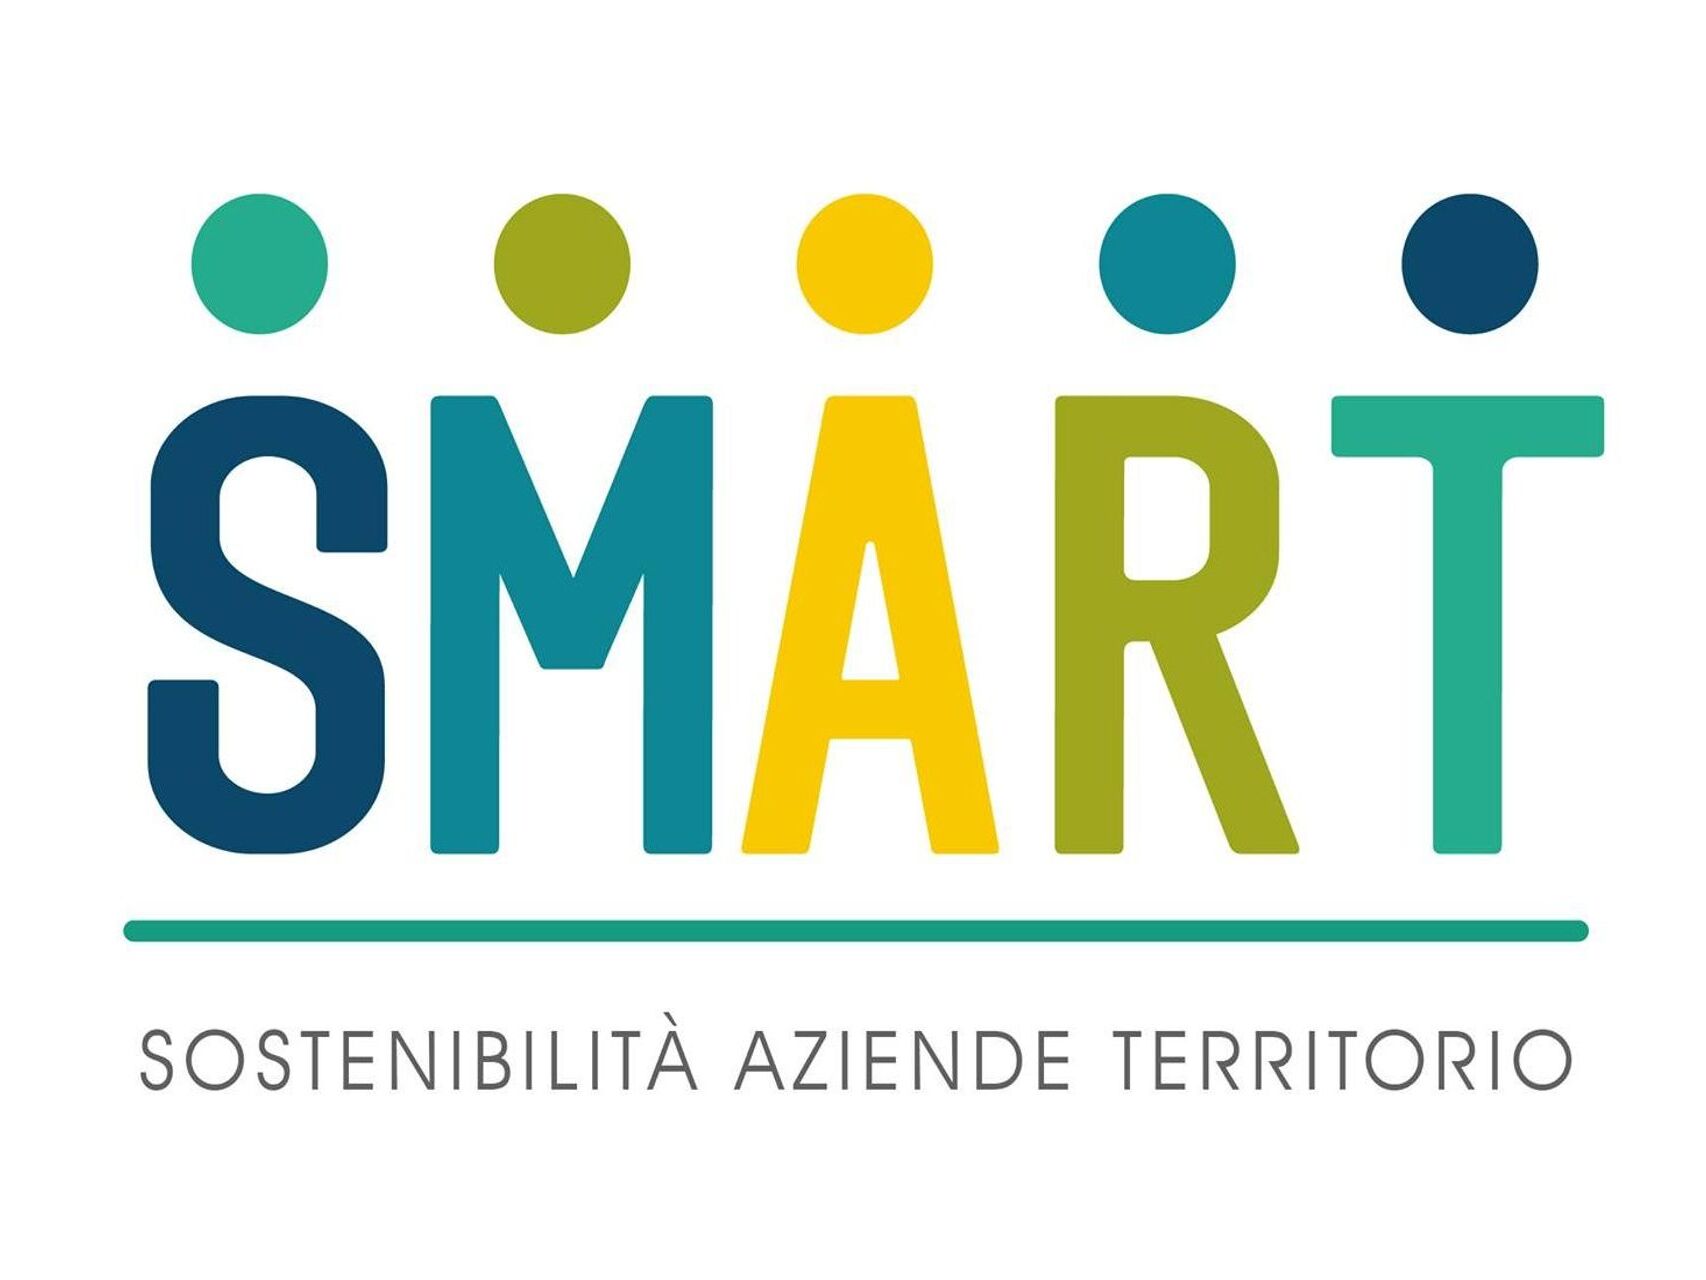 Das Logo des SMART-Projekts (Sustainable Strategies and Responsible Business Models in the Cross-Border Territory)